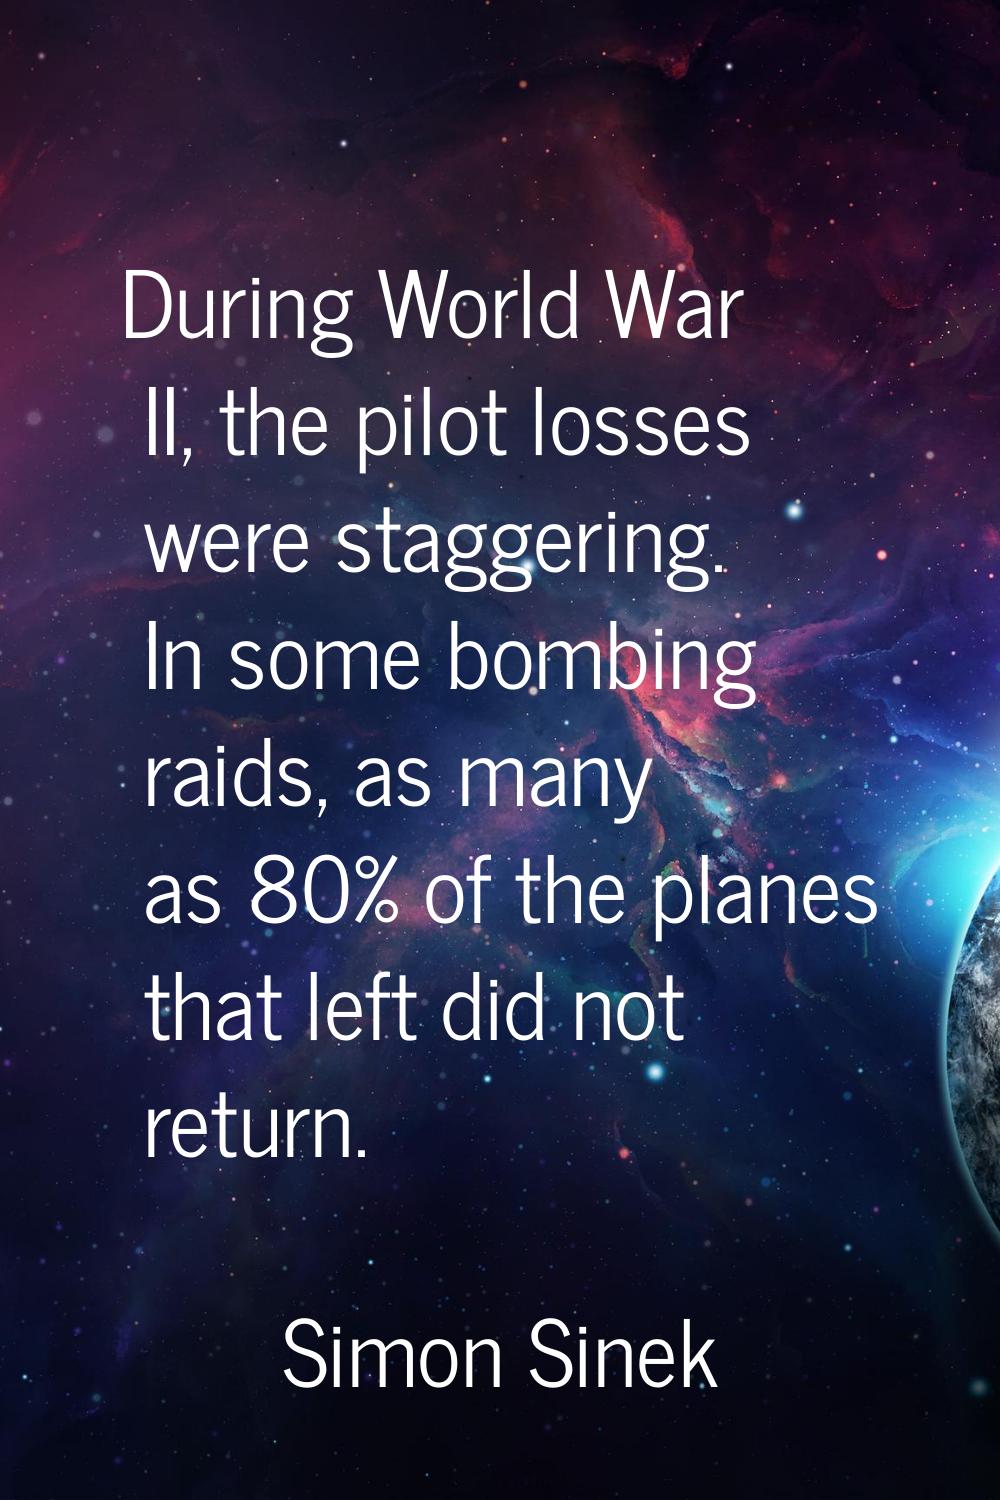 During World War II, the pilot losses were staggering. In some bombing raids, as many as 80% of the